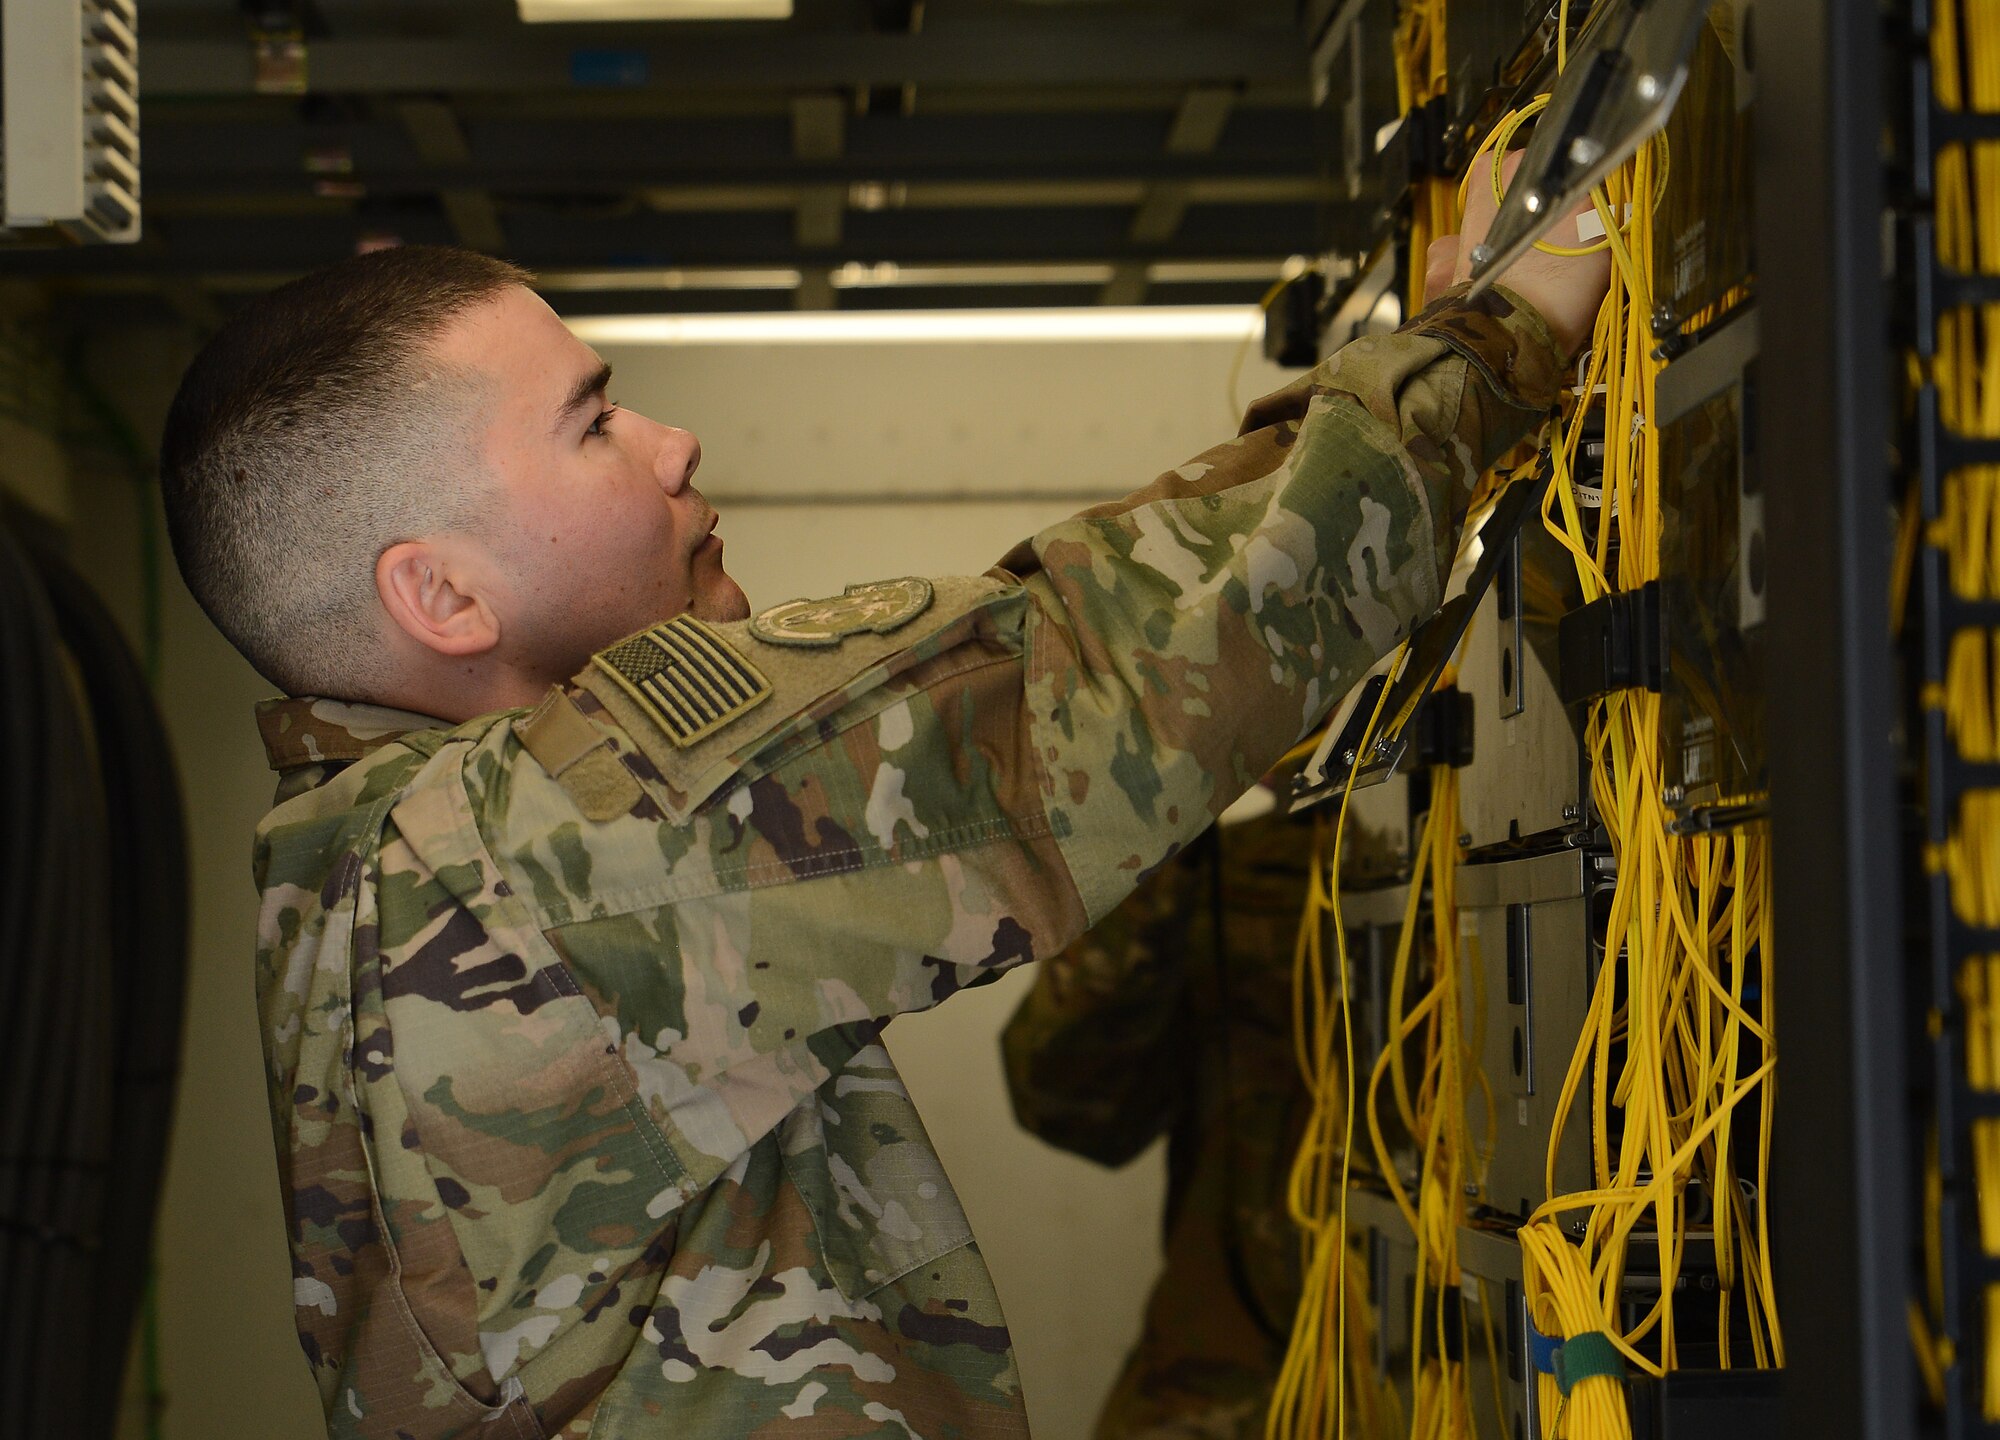 Staff Sgt. Brandon Hasegawa, 455th Expeditionary Communication Squadron cyber transport technician, checks the non-secure internet protocol router wires Mar. 22, 2018 at Bagram Airfield, Afghanistan.